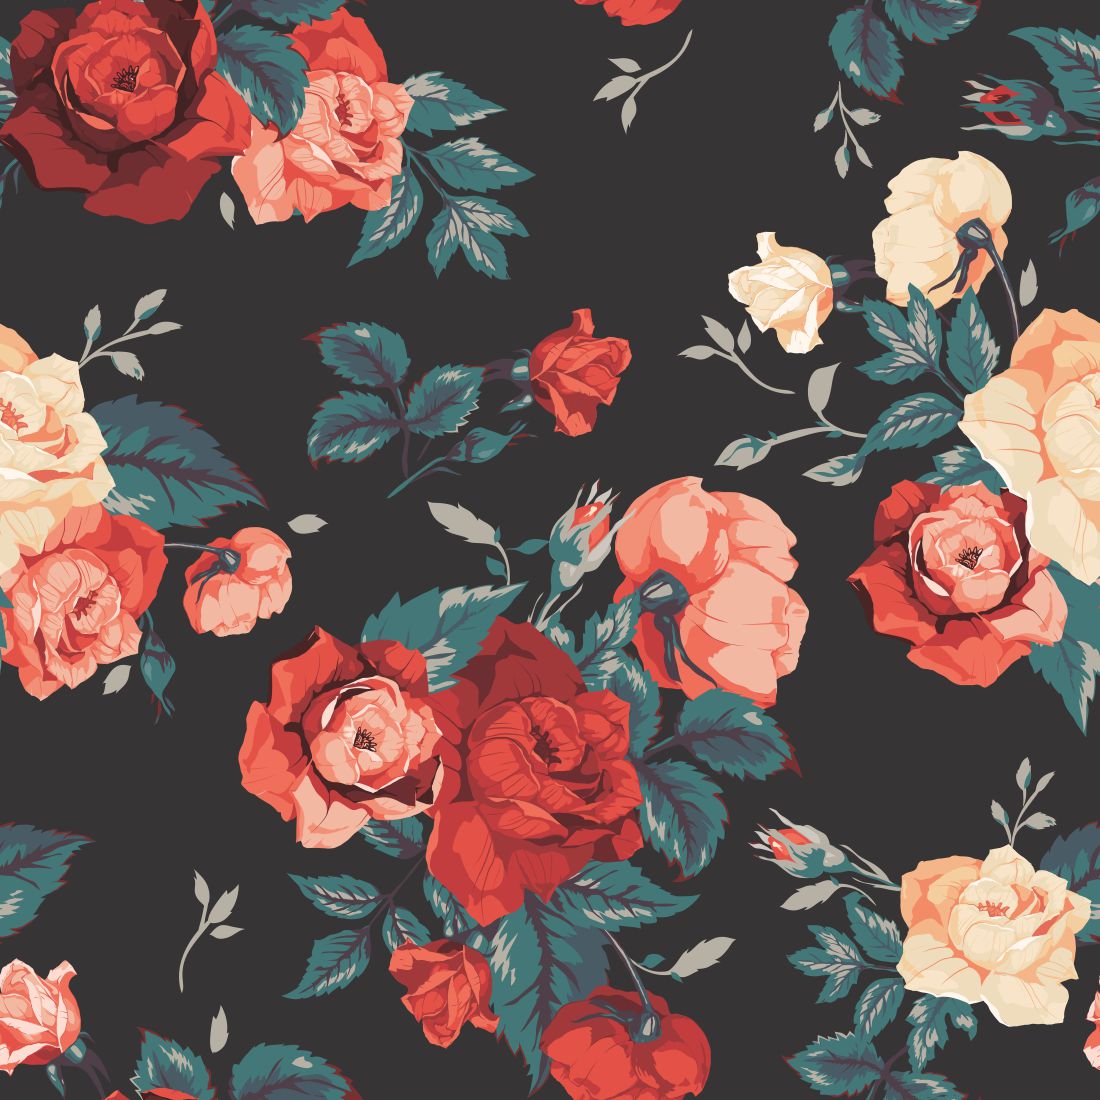 20 Plus Turkish Seamless Floral Patterns And Textures Cover Image.